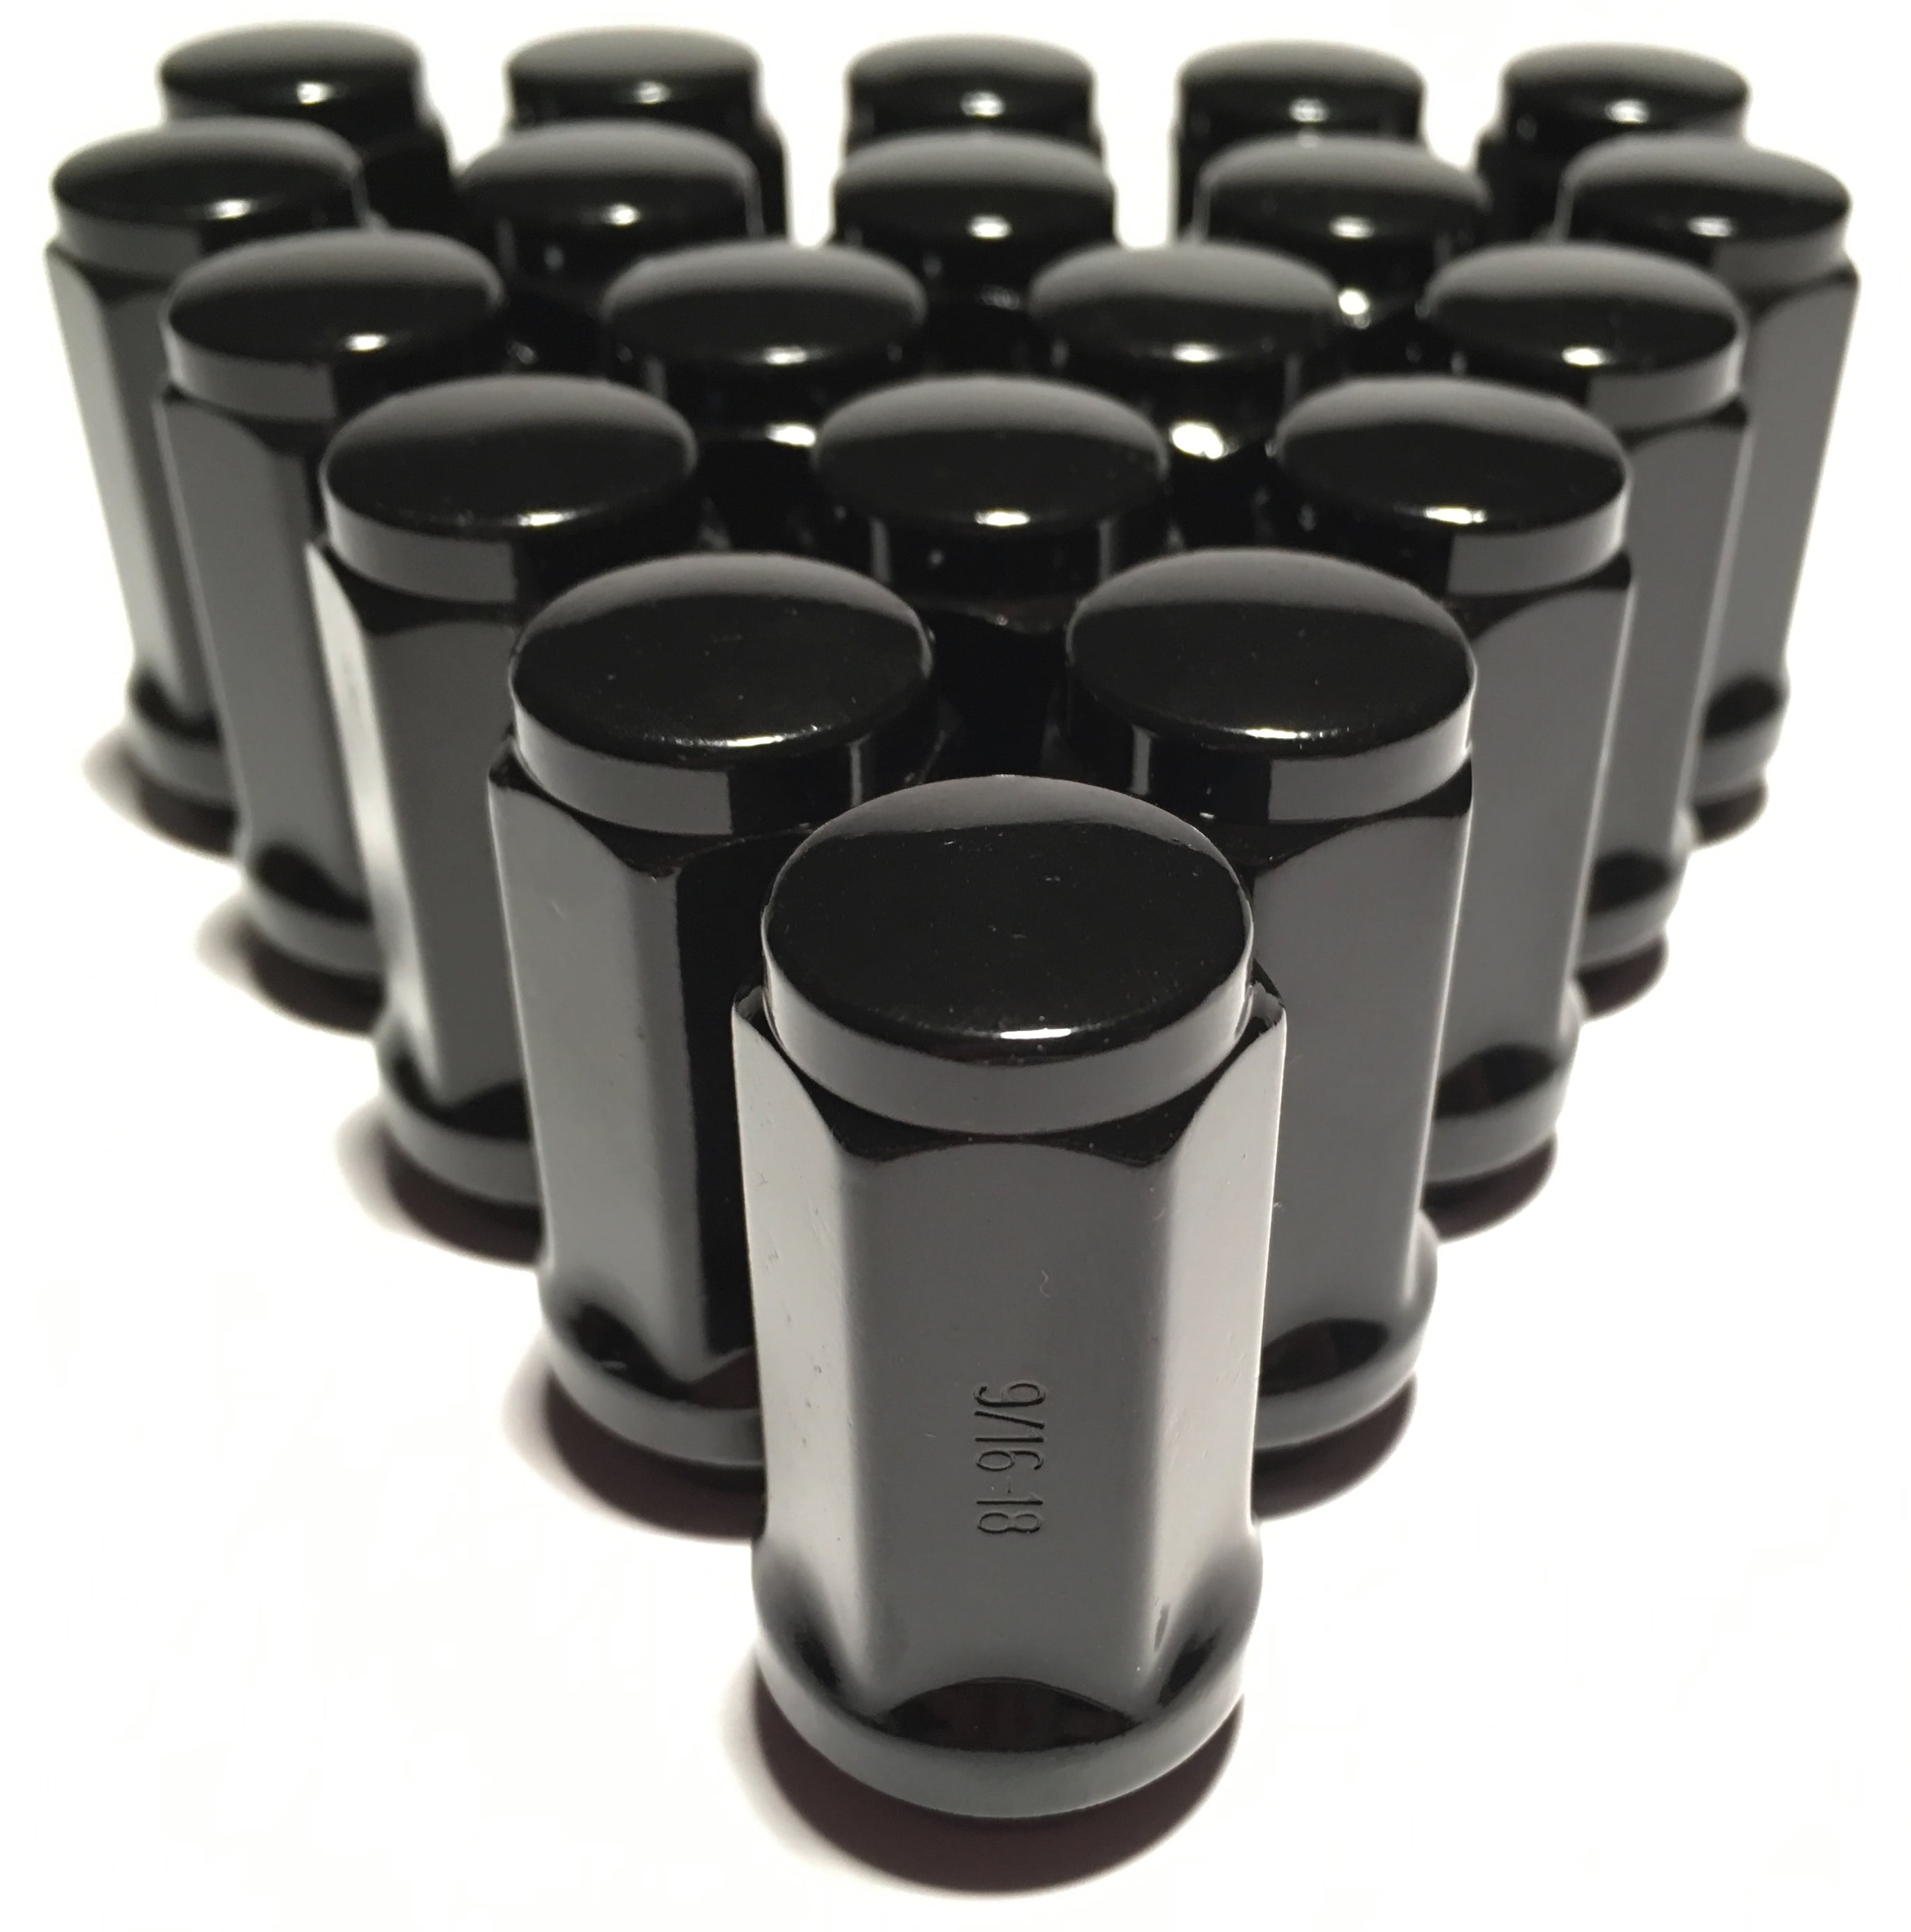 20 Black Bulge Acorn Lug Nuts 1.75/" Tall 14x1.5 Cone Seat For Aftermarket Wheels